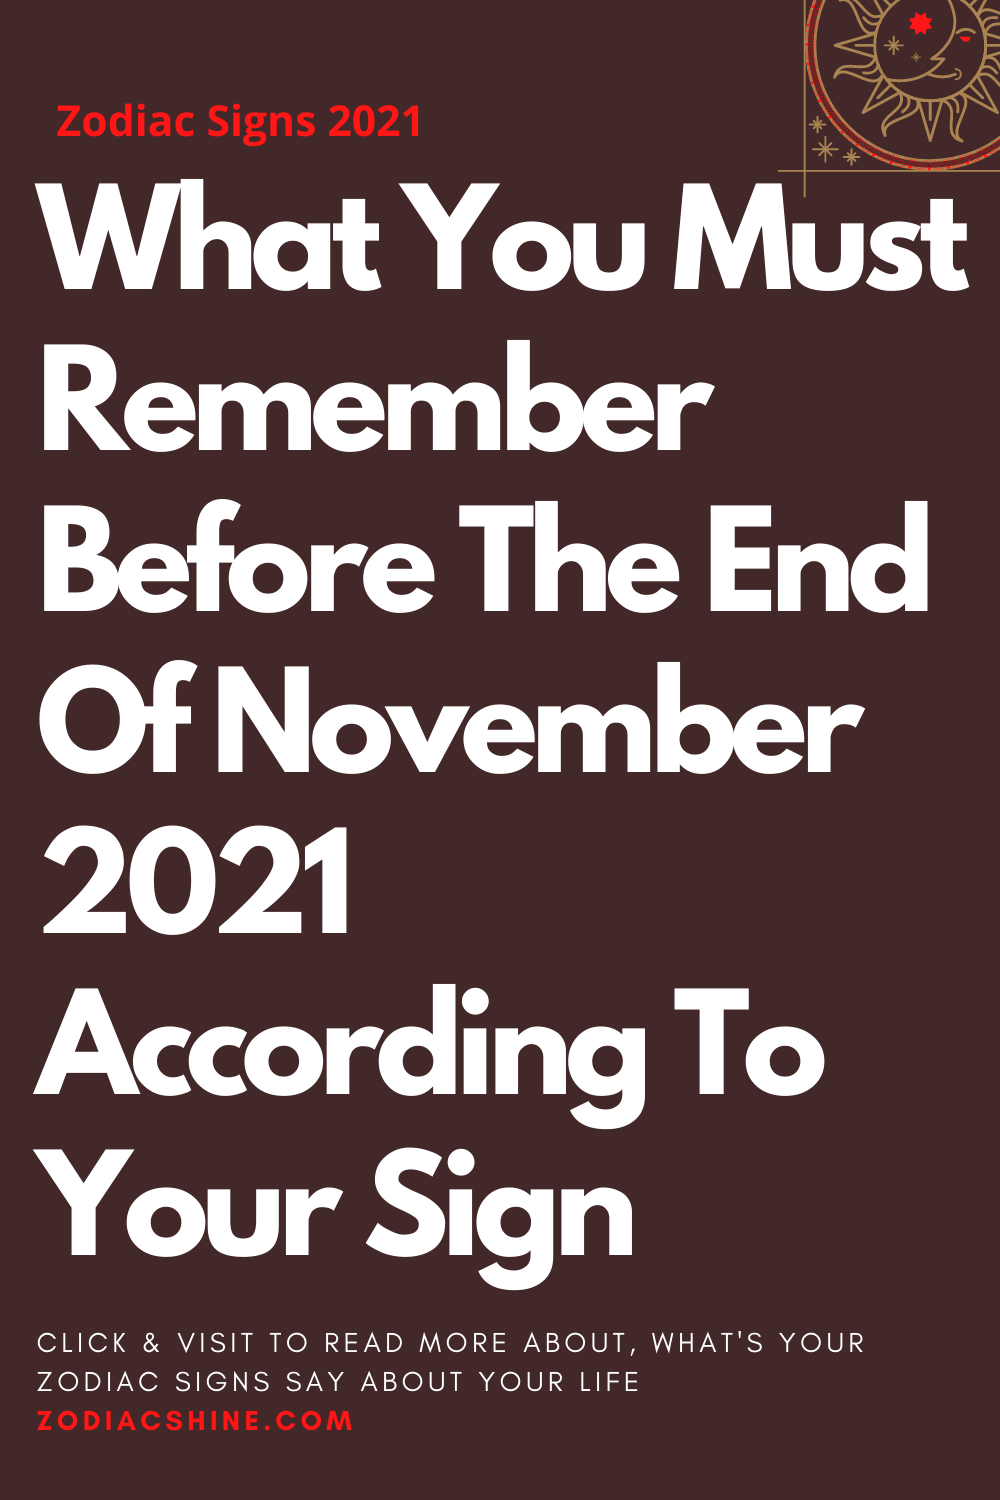 What You Must Remember Before The End Of November 2021 According To Your Sign